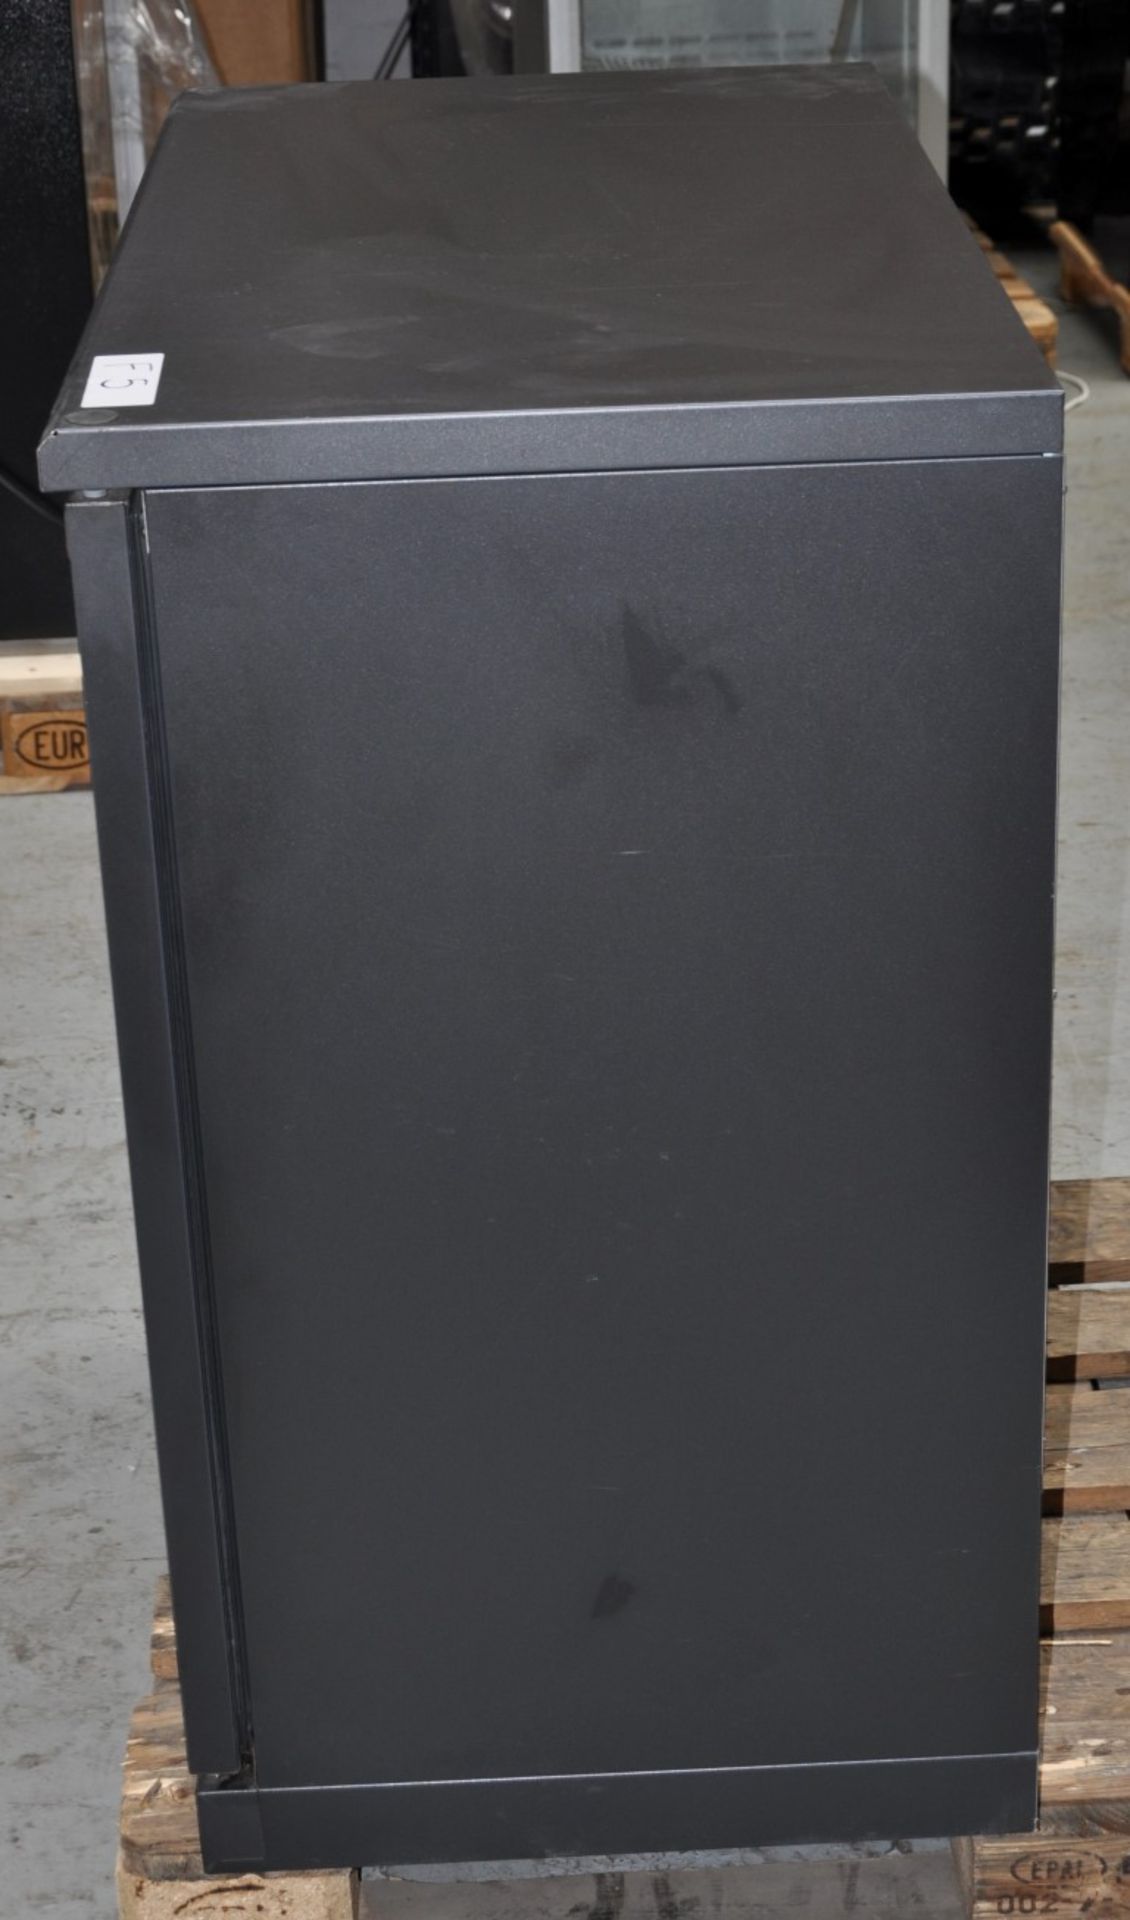 1 x Gamko Two Door Bottle Cooler With Internal Shelves - Ideal For Pubs, Clubs or Restaurants - BEER - Image 4 of 5